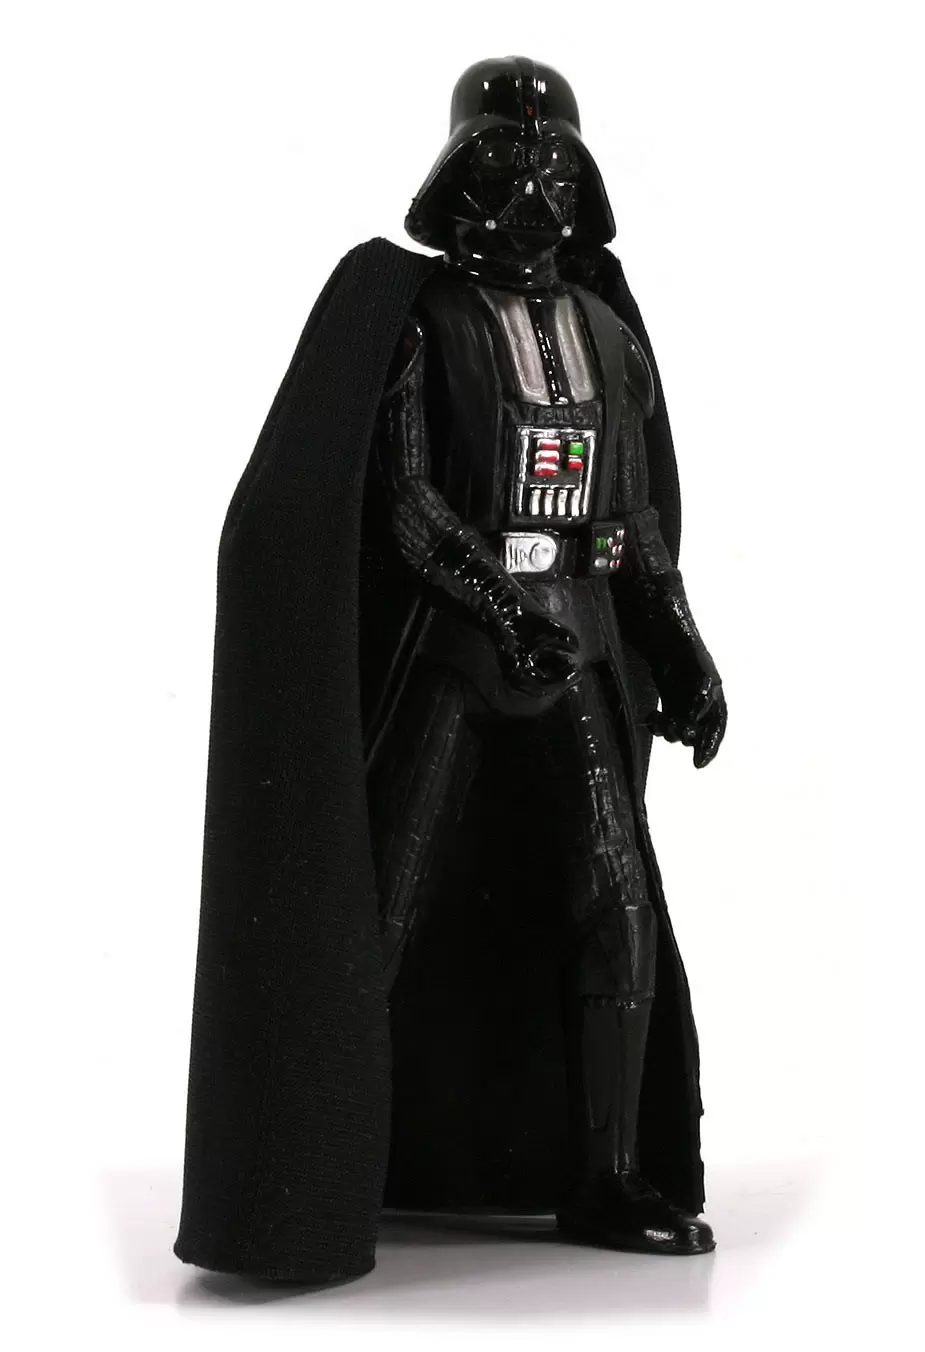 The Original Trilogy Collection (OTC) - Darth Vader (A New Hope)